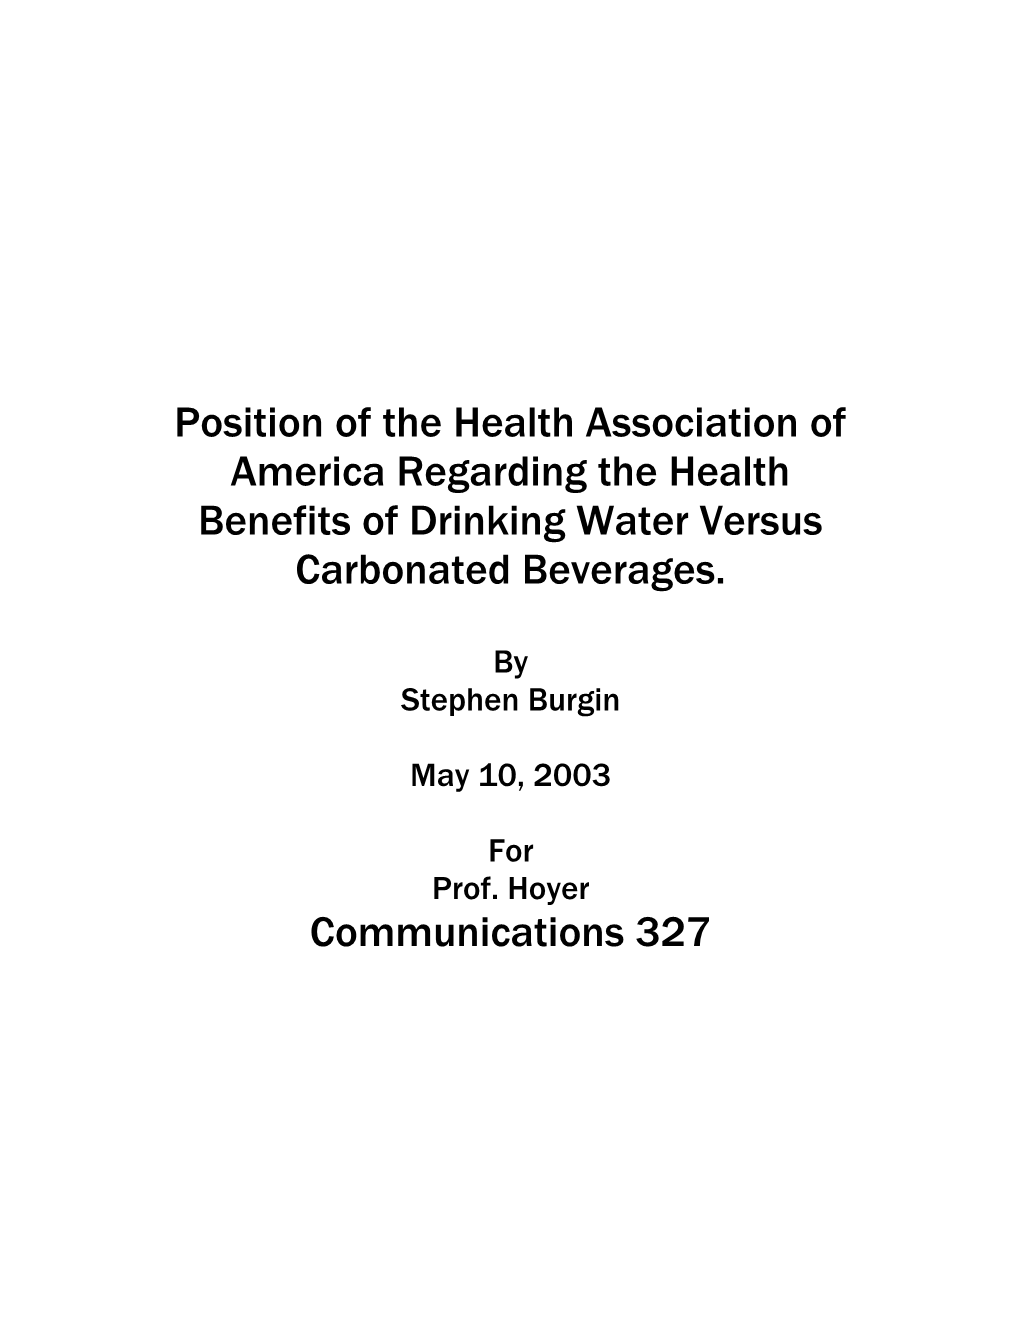 Position Of The Health Association Of America: People Should Drink More Water Instead Of Drinking Soft Drinks